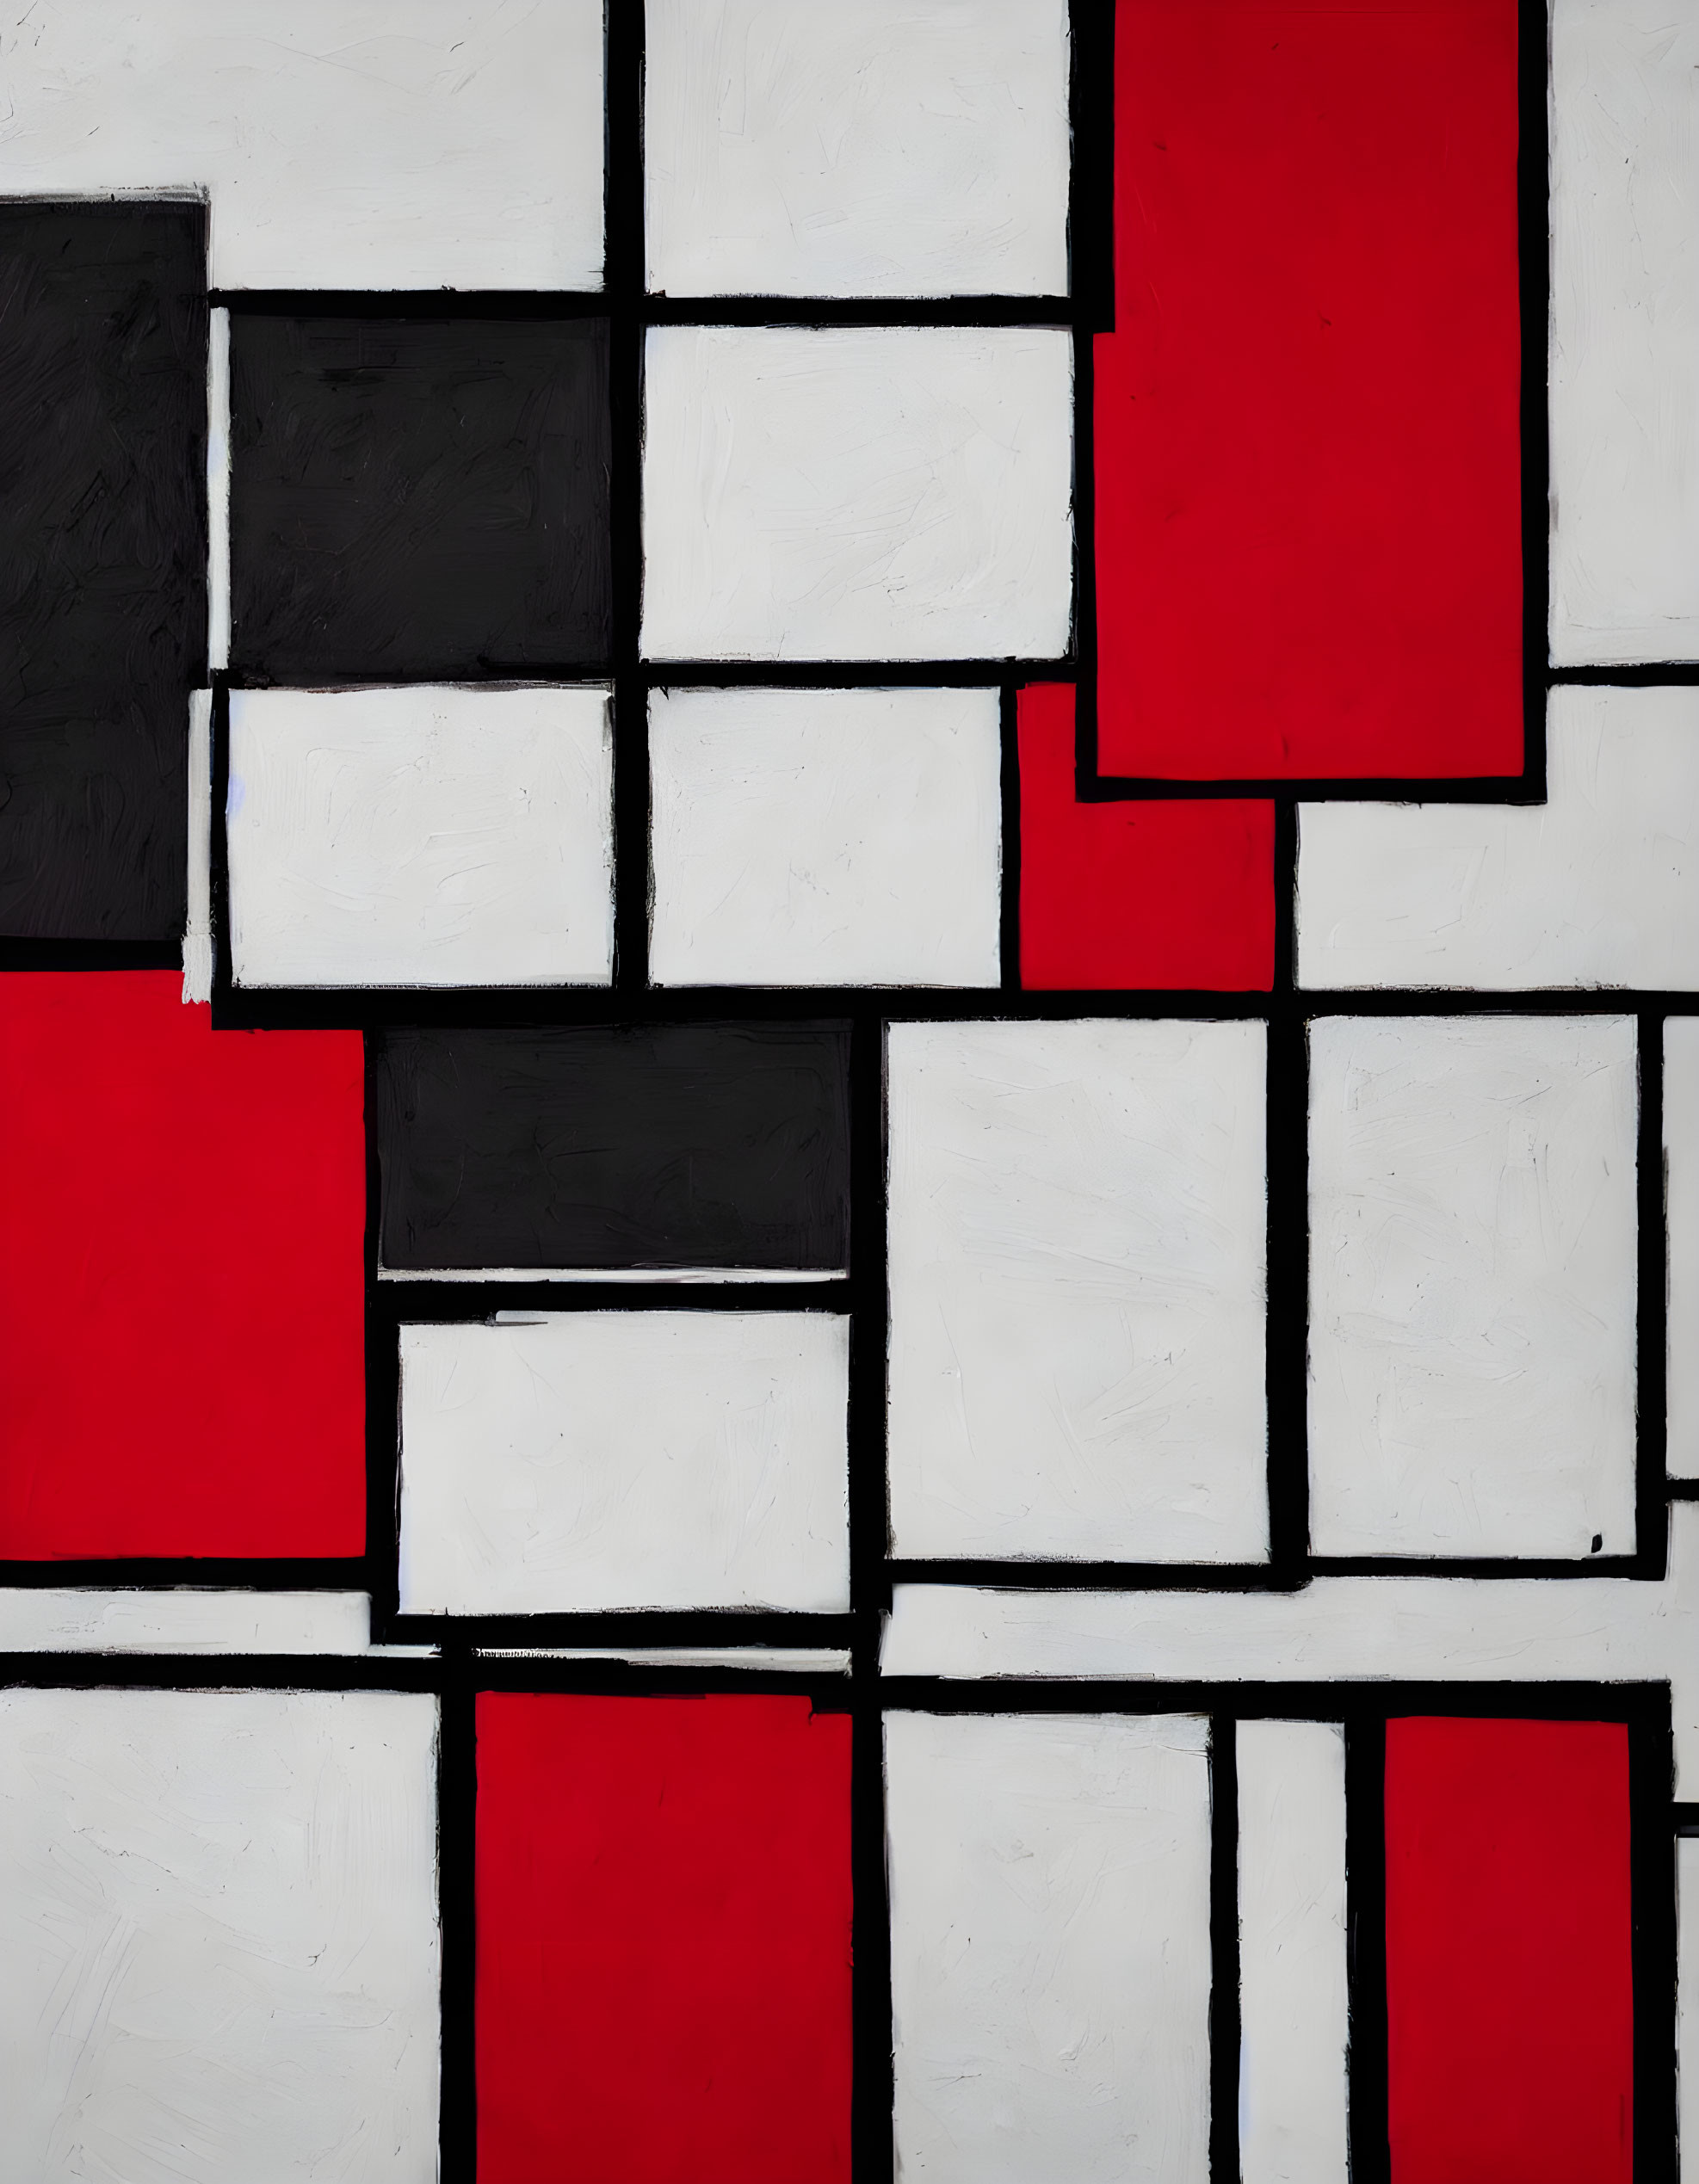 Geometric Abstract Artwork: Grid of Rectangles in Black, White, and Red